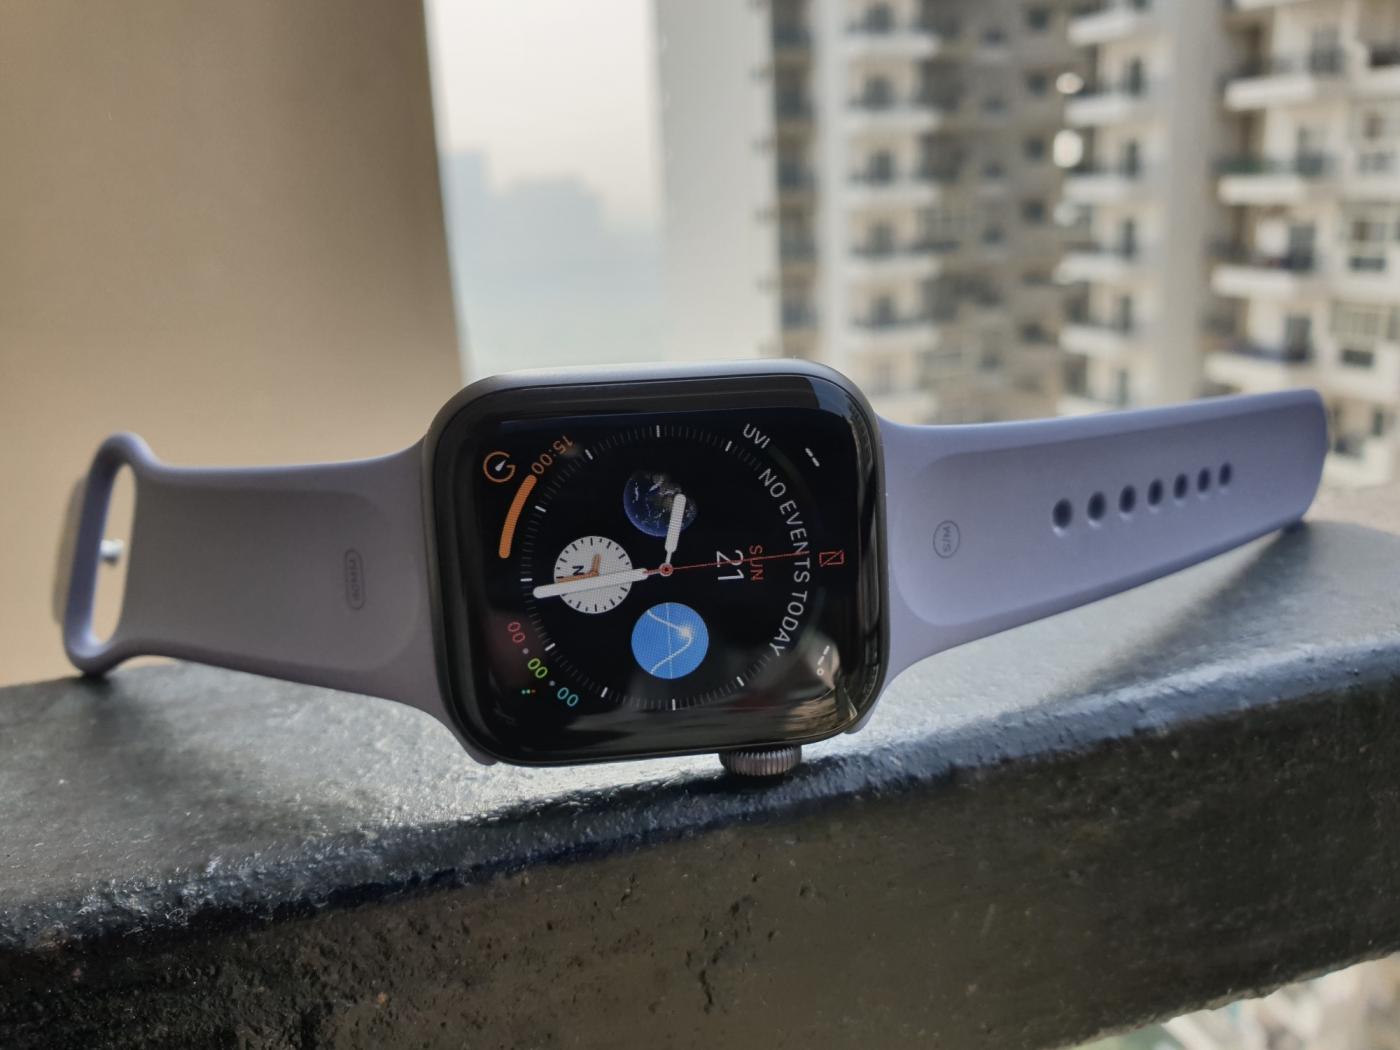 Apple Watch Series 4, now available in India, comes with Fall Detection feature and Heart Rate sensor for low and high notifications. (Photo: IANS) by .